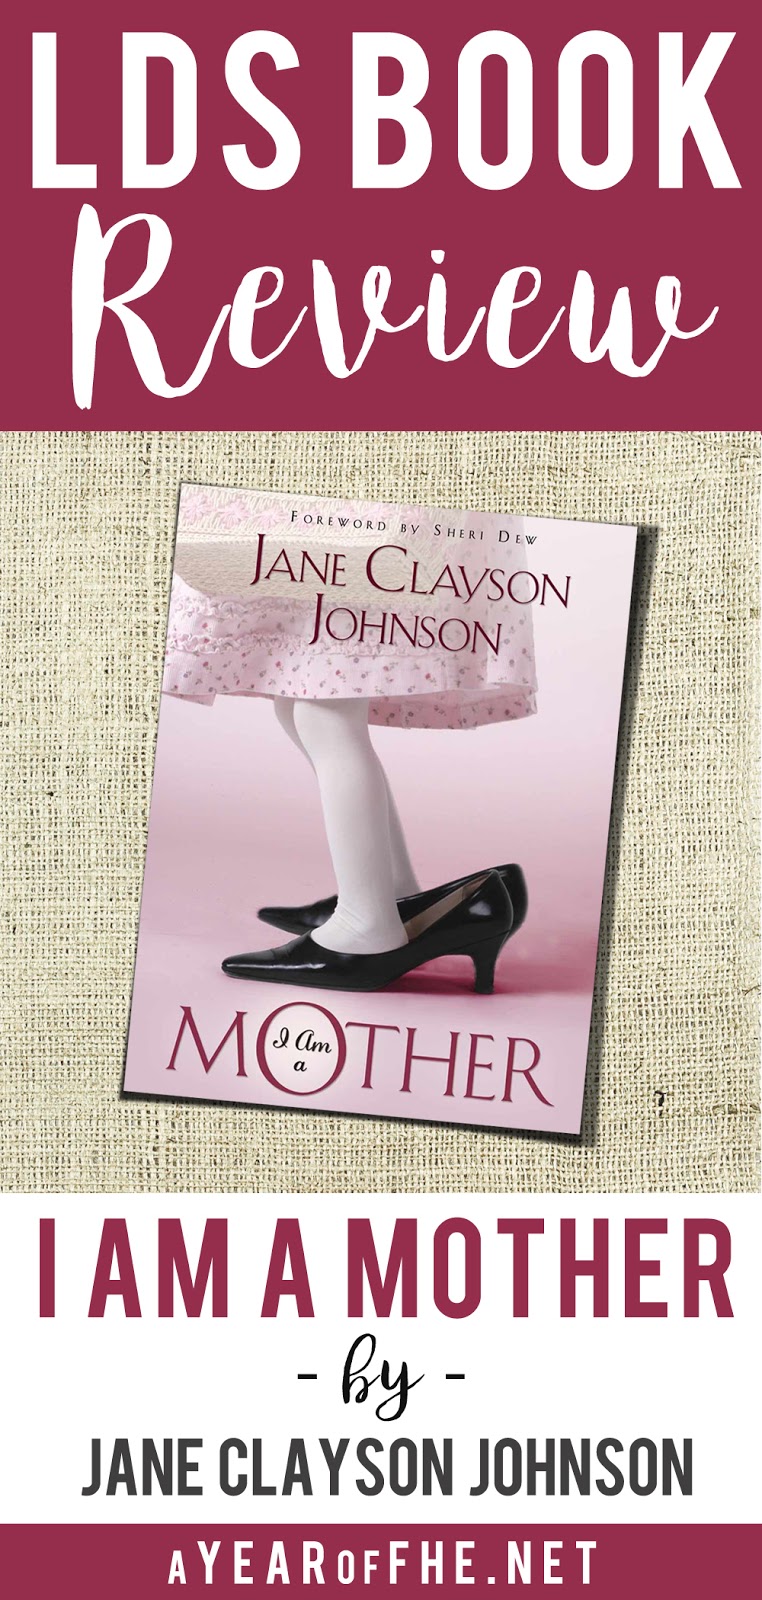 A Year of FHE // A review of the book "I Am a Mother" by Jane Clayson Johnson.  Great gift idea for Mother's Day or birthdays! #lds #mother #sud #book